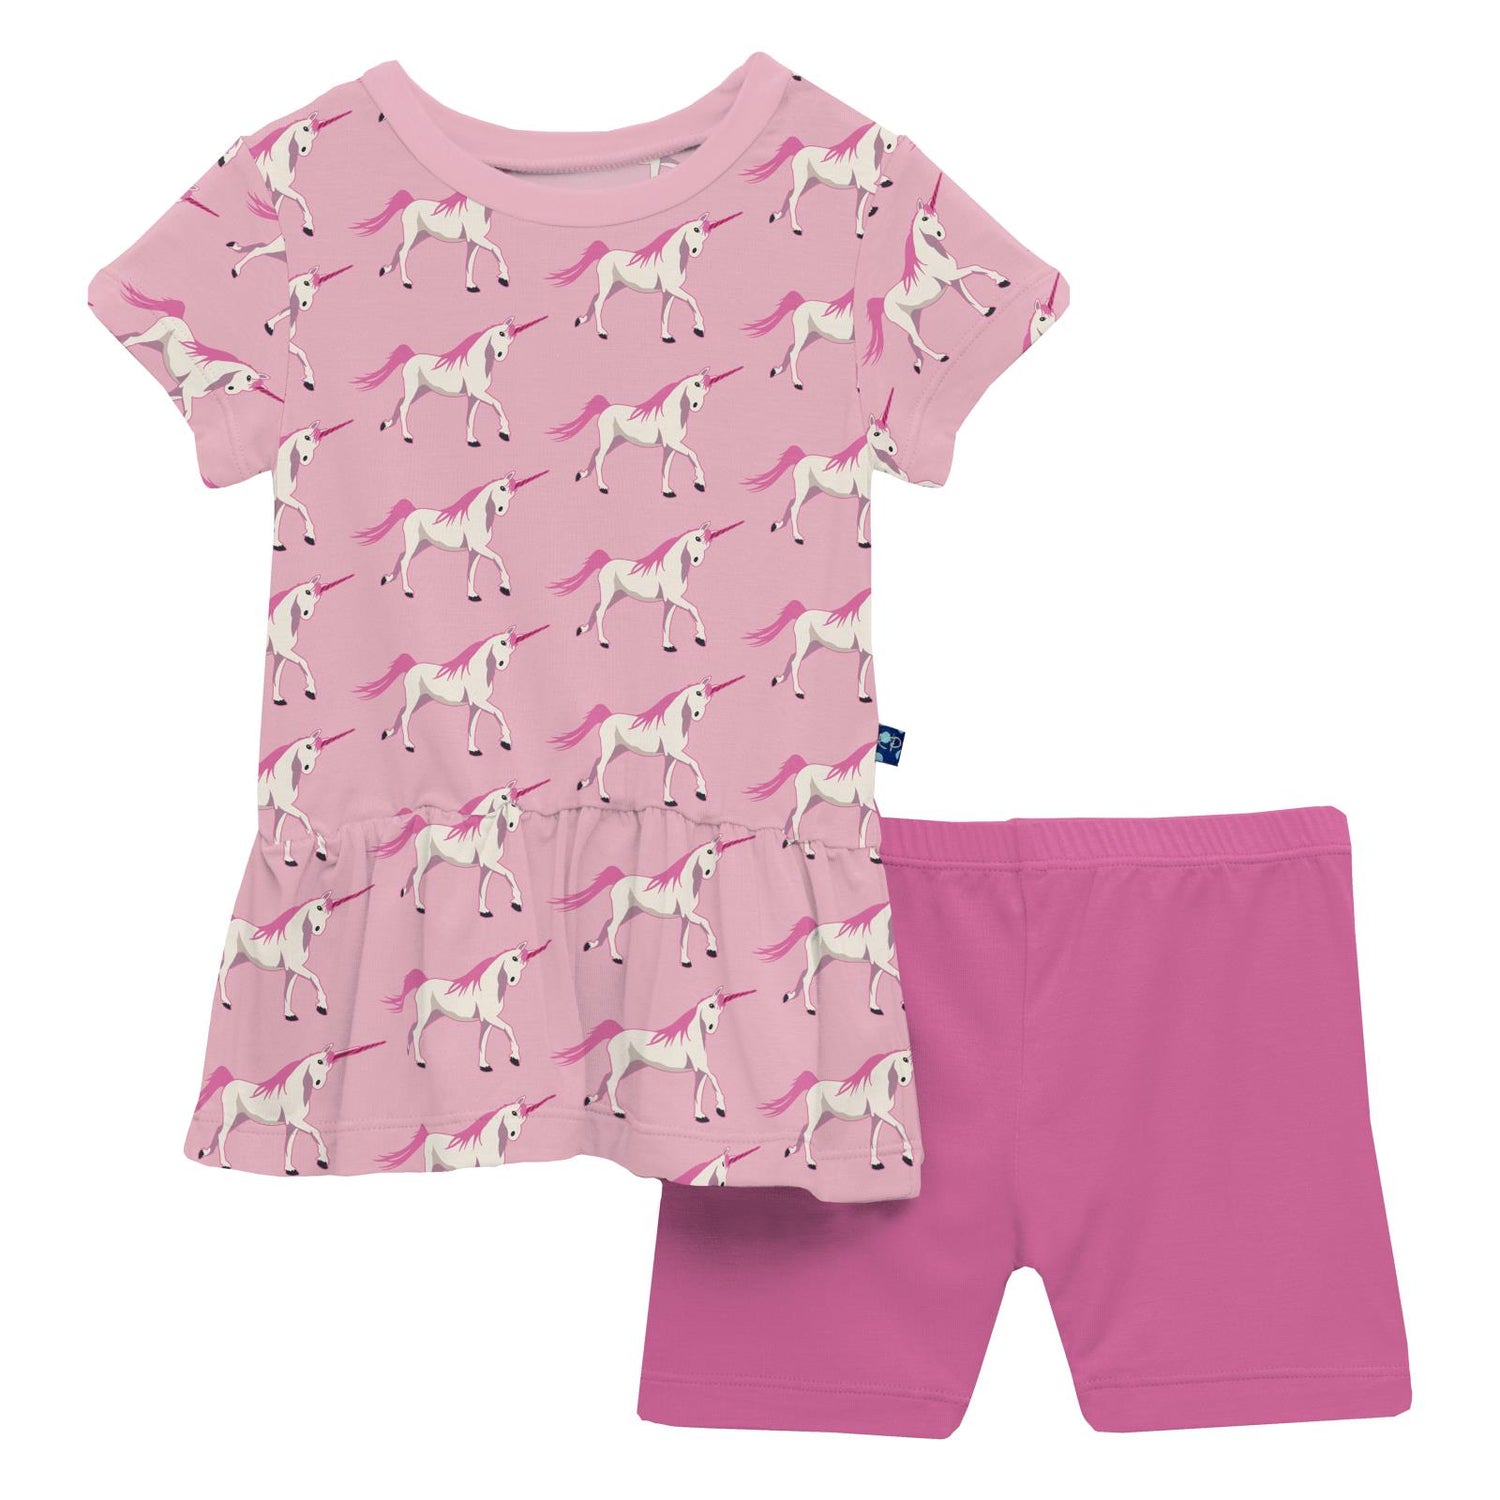 Print Short Sleeve Playtime Outfit Set in Cake Pop Prancing Unicorn